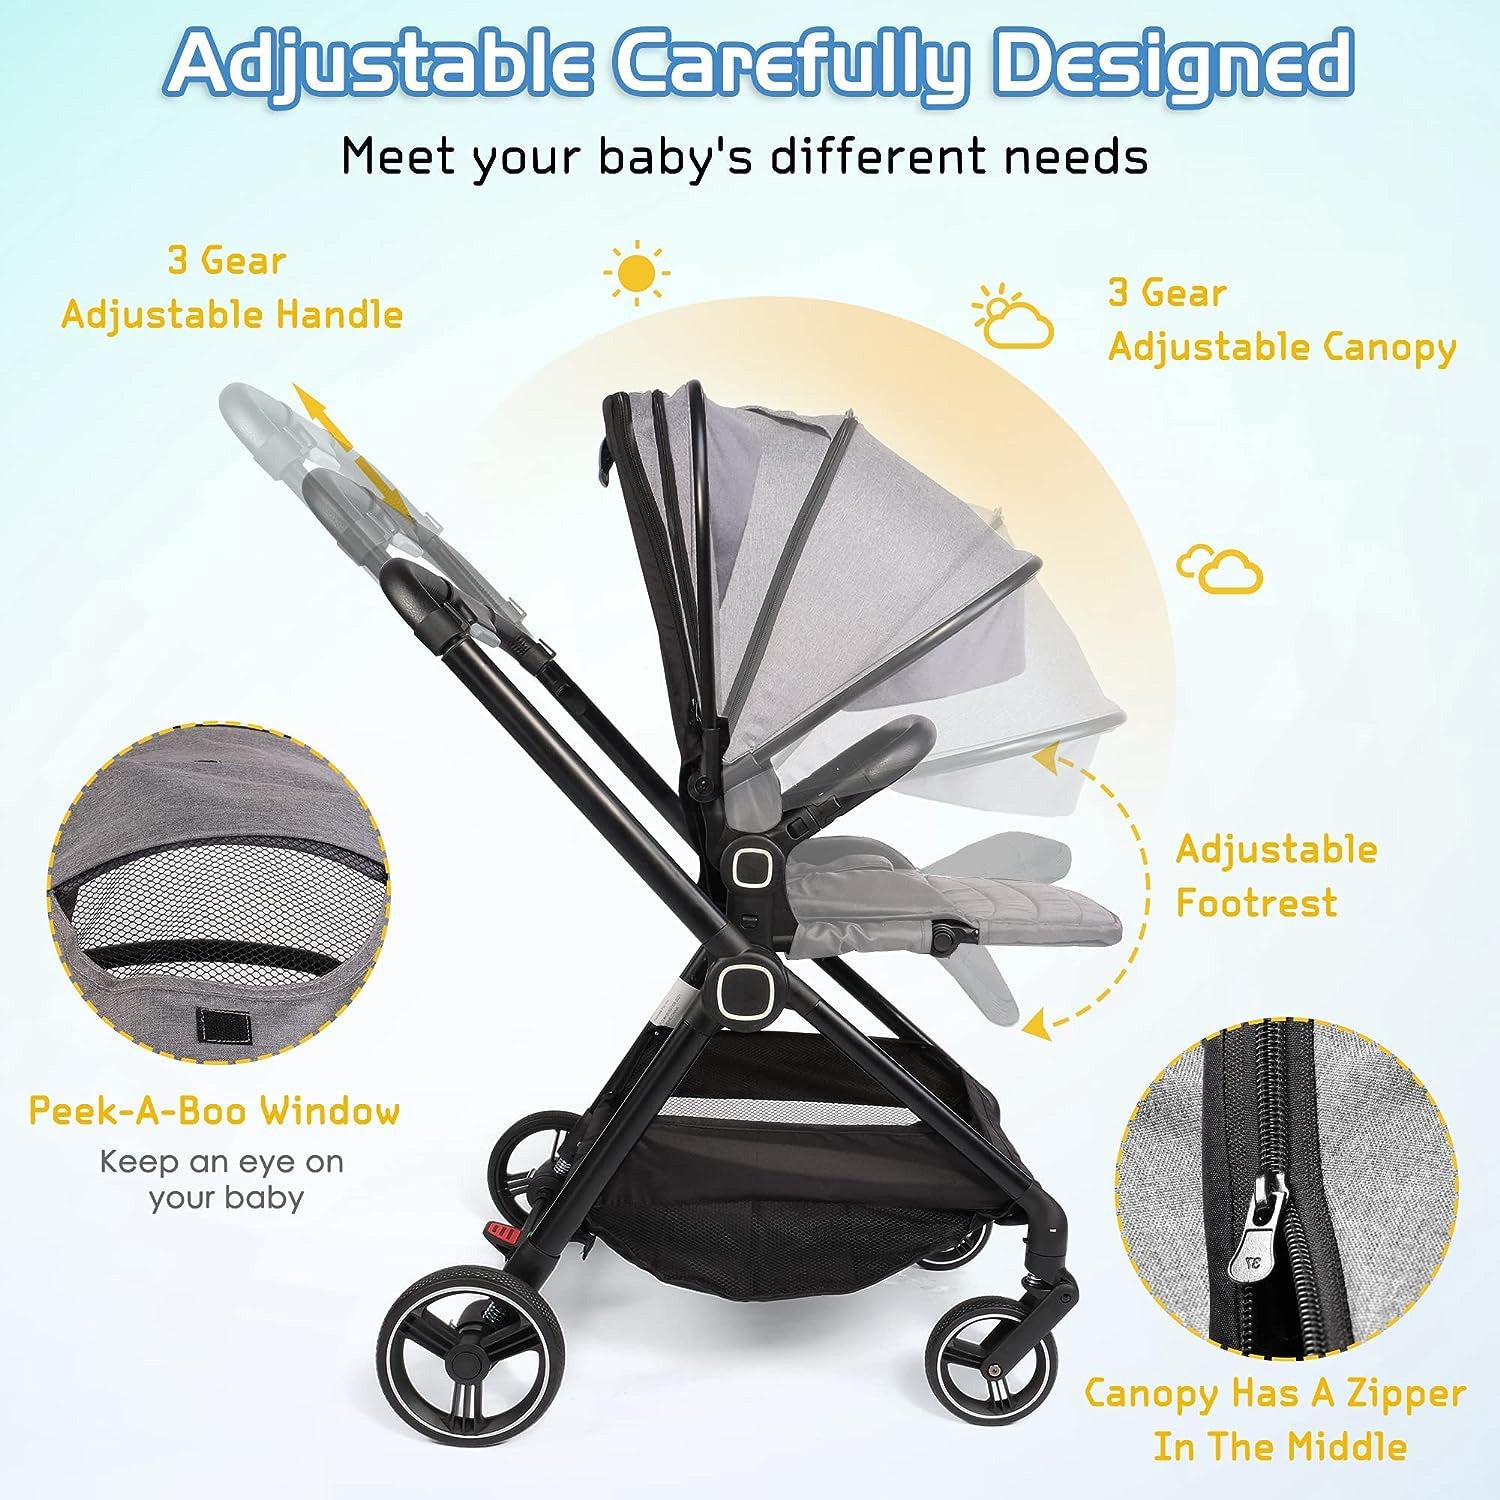 2 in 1 Convertible Baby Stroller Carriage Bassinet to Stroller Adjustable Footrest & Canopy, 5-Point Seat Belt, Lightweight Aluminum Frame, Gray